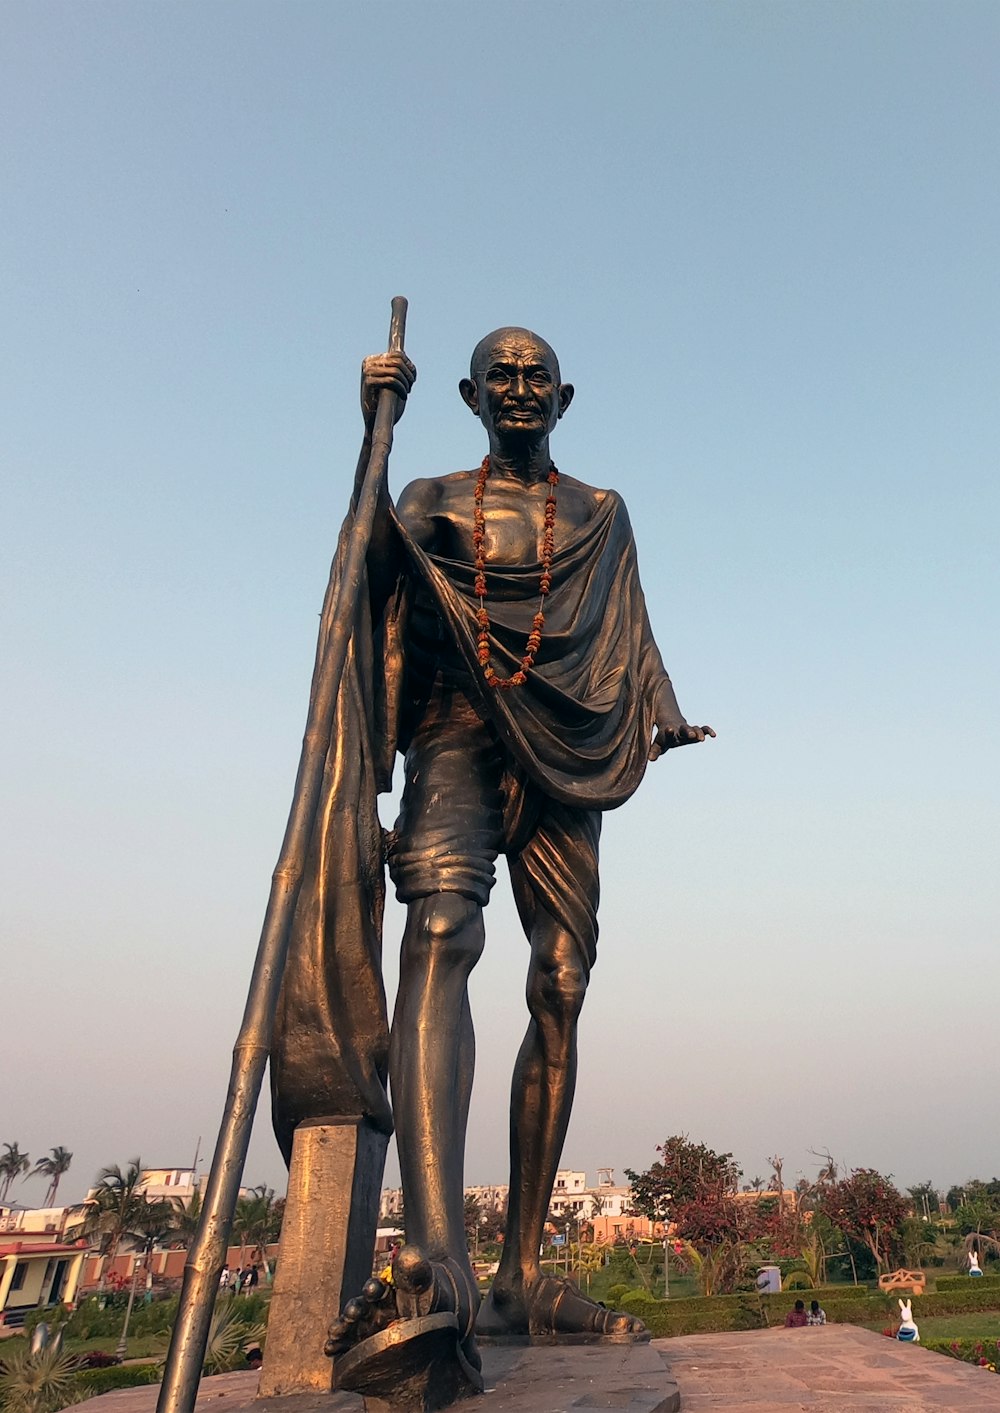 a statue of a man holding a flag